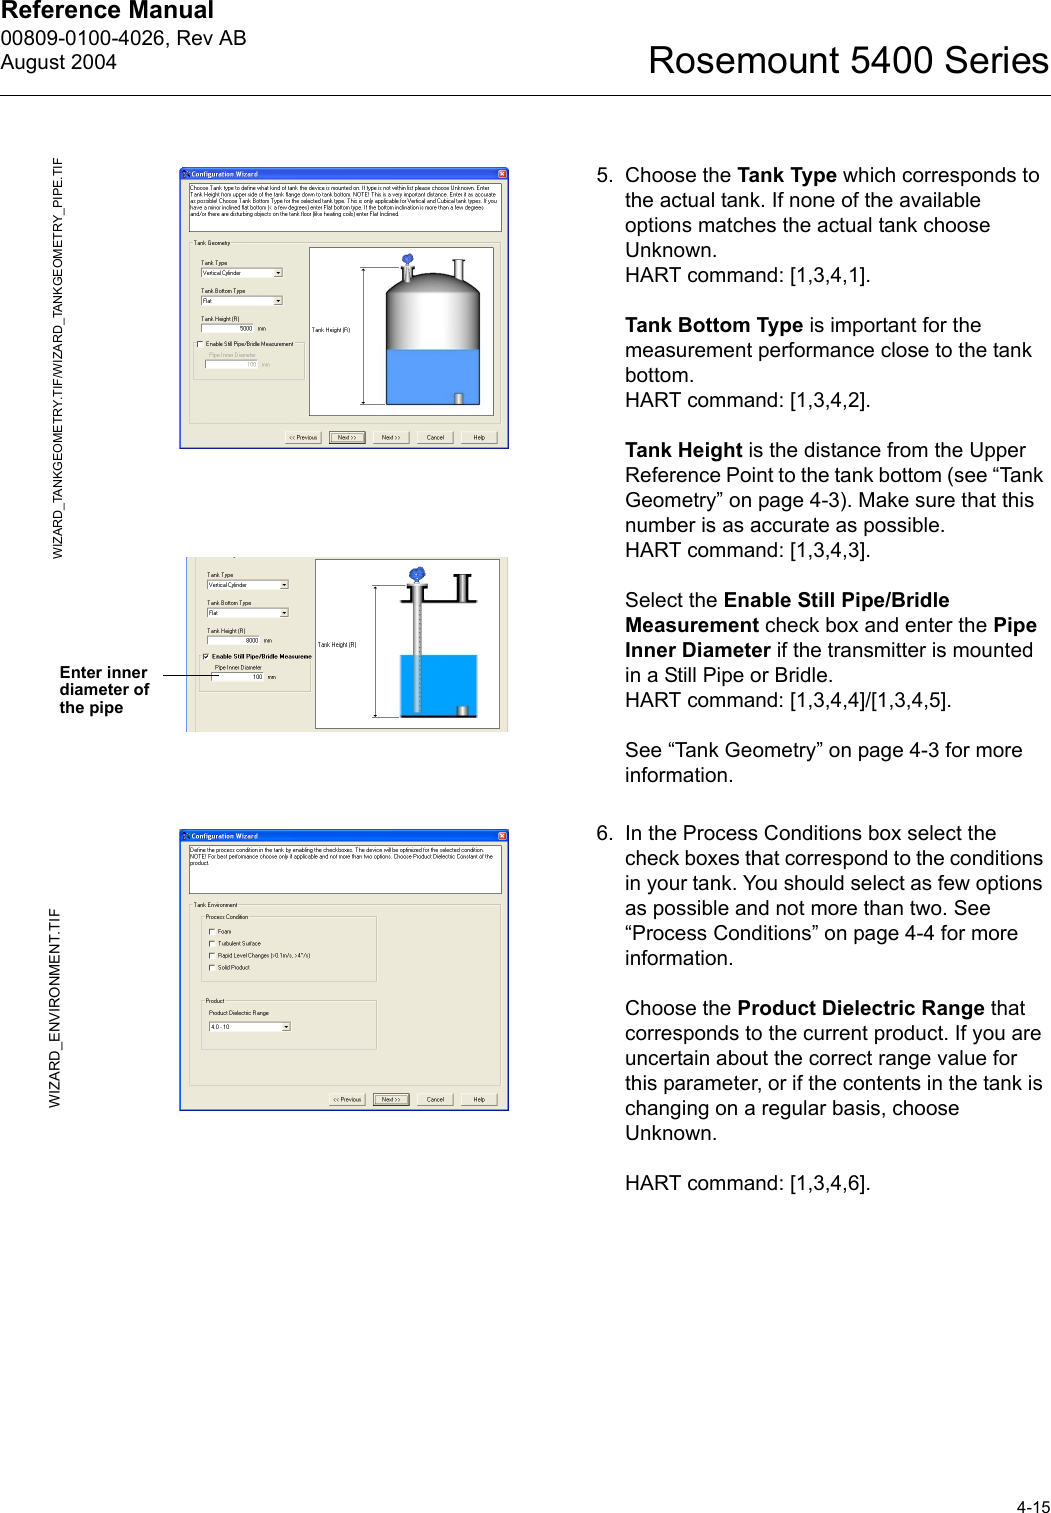 Reference Manual 00809-0100-4026, Rev ABAugust 20044-15Rosemount 5400 Series5. Choose the Tank Type which corresponds to the actual tank. If none of the available options matches the actual tank choose Unknown. HART command: [1,3,4,1].Tank Bottom Type is important for the measurement performance close to the tank bottom.HART command: [1,3,4,2].Tank Height is the distance from the Upper Reference Point to the tank bottom (see “Tank Geometry” on page 4-3). Make sure that this number is as accurate as possible.HART command: [1,3,4,3].Select the Enable Still Pipe/Bridle Measurement check box and enter the Pipe Inner Diameter if the transmitter is mounted in a Still Pipe or Bridle. HART command: [1,3,4,4]/[1,3,4,5].See “Tank Geometry” on page 4-3 for more information.6. In the Process Conditions box select the check boxes that correspond to the conditions in your tank. You should select as few options as possible and not more than two. See “Process Conditions” on page 4-4 for more information.Choose the Product Dielectric Range that corresponds to the current product. If you are uncertain about the correct range value for this parameter, or if the contents in the tank is changing on a regular basis, choose Unknown.HART command: [1,3,4,6].WIZARD_TANKGEOMETRY.TIF/WIZARD_TANKGEOMETRY_PIPE.TIFEnter inner diameter of the pipeWIZARD_ENVIRONMENT.TIF